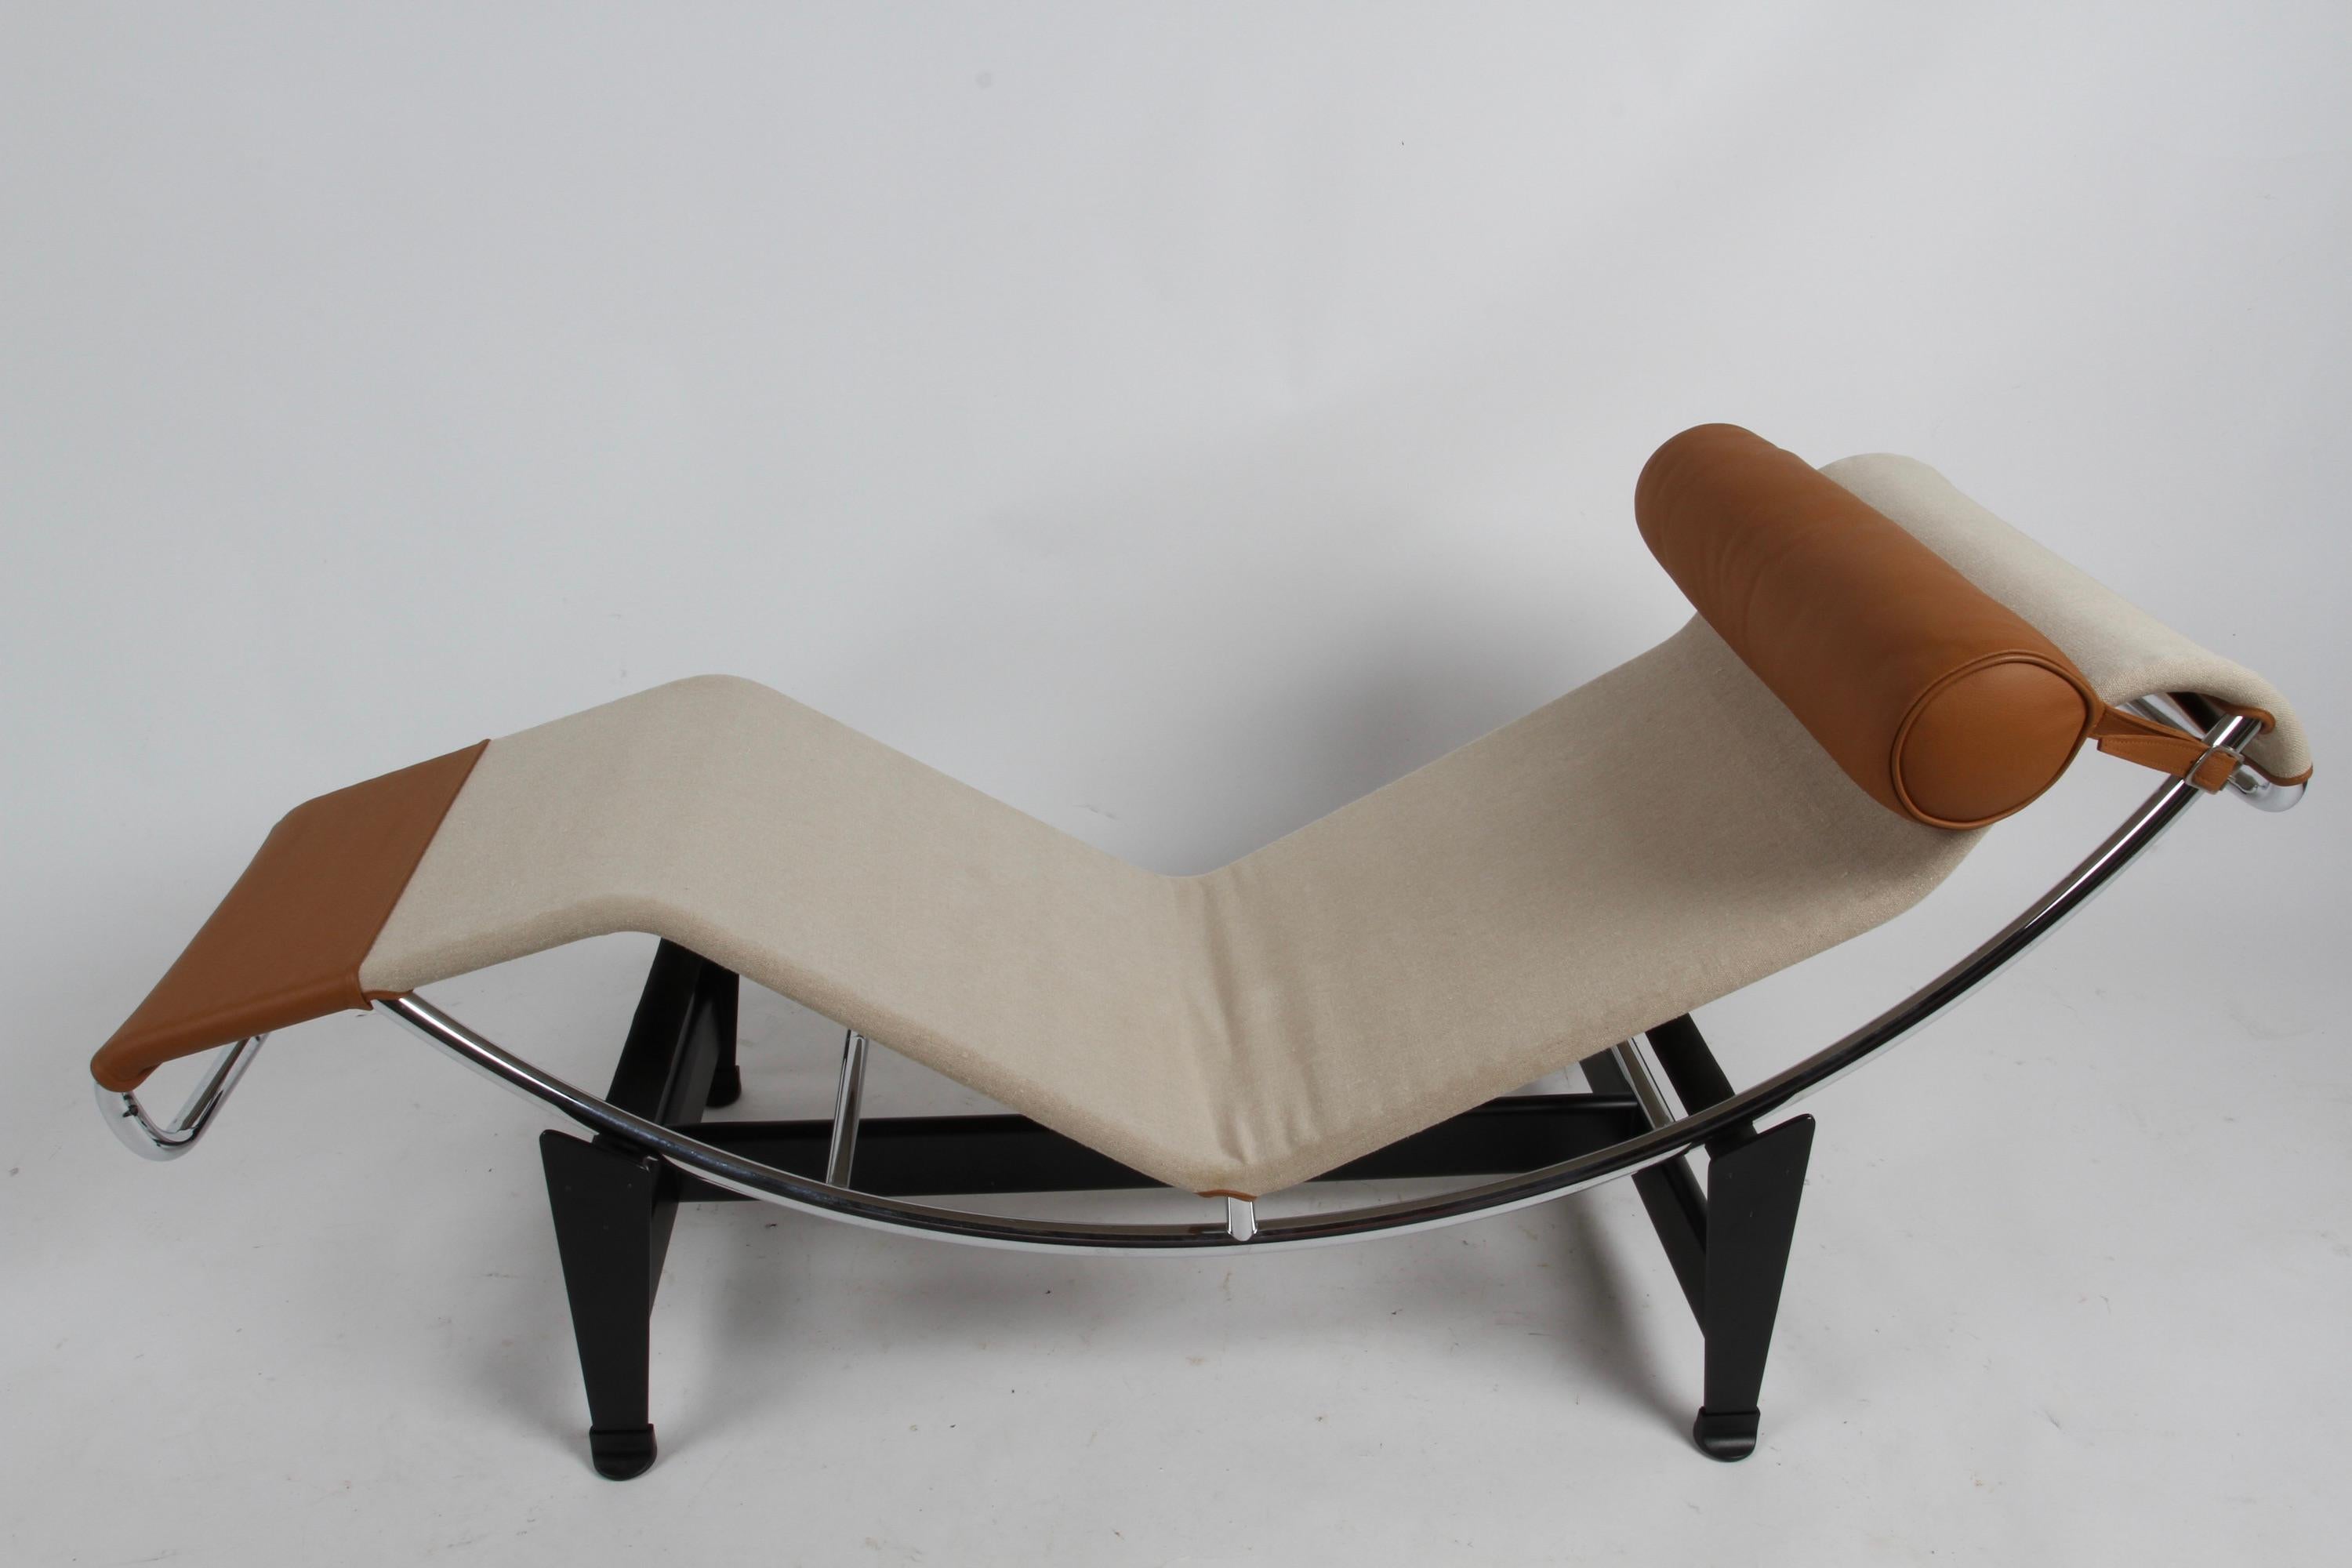 Lc4 Chaise Lounge Canvas & Leather, Charlotte Perriand & Le Corbusier, Cassina 4